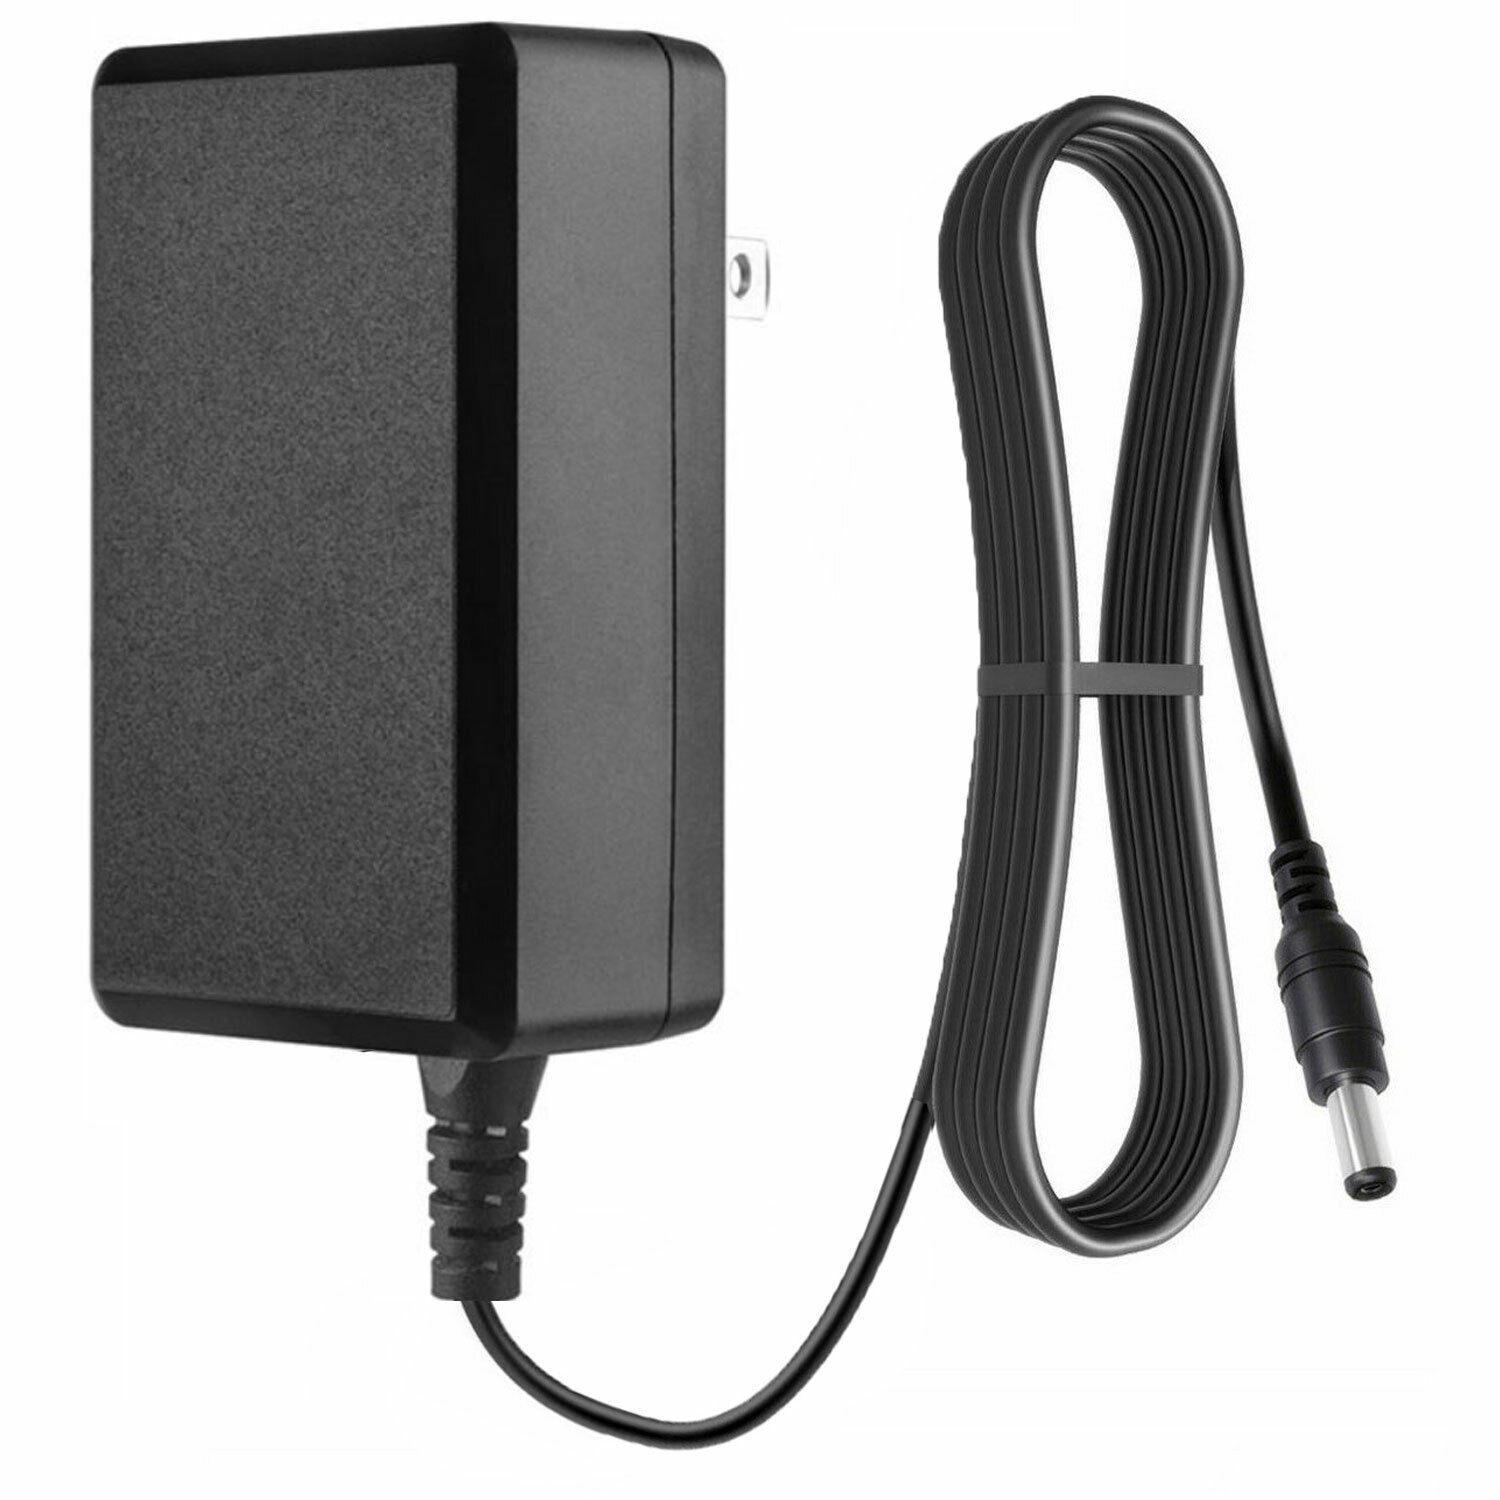 AC-DC Adapter Charger for Braven BRV-XXL Wireless Speaker Power Supply Cord PSU Technical Specifications: Construction